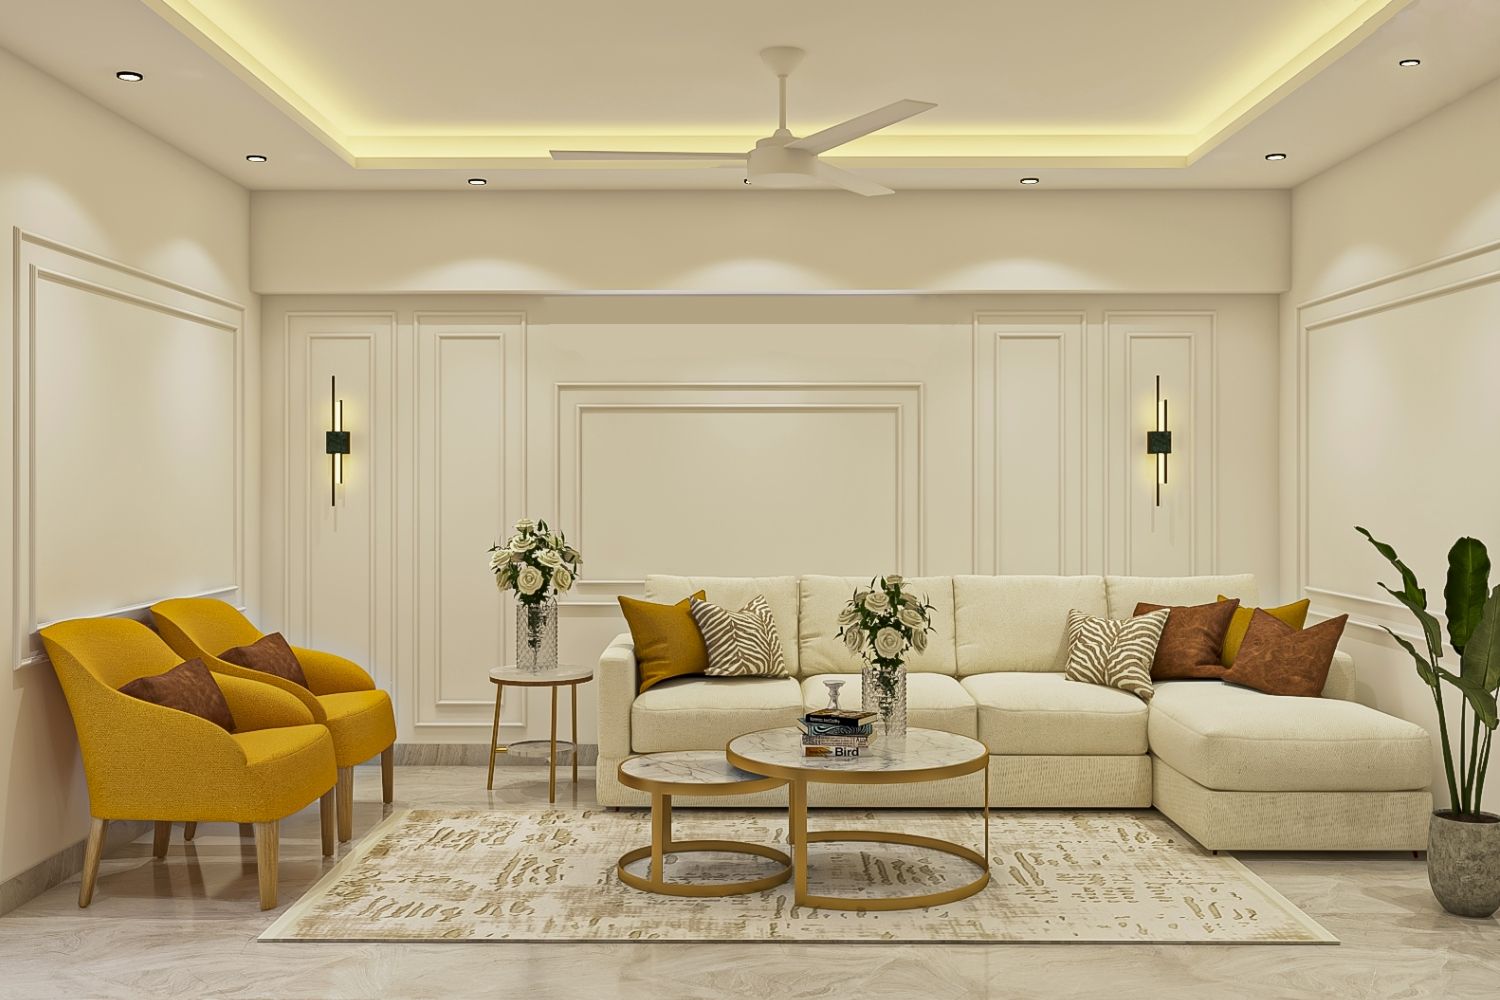 Modern Living Room Design With Off-White L Shaped Sectional Sofa And Yellow Accent Chairs